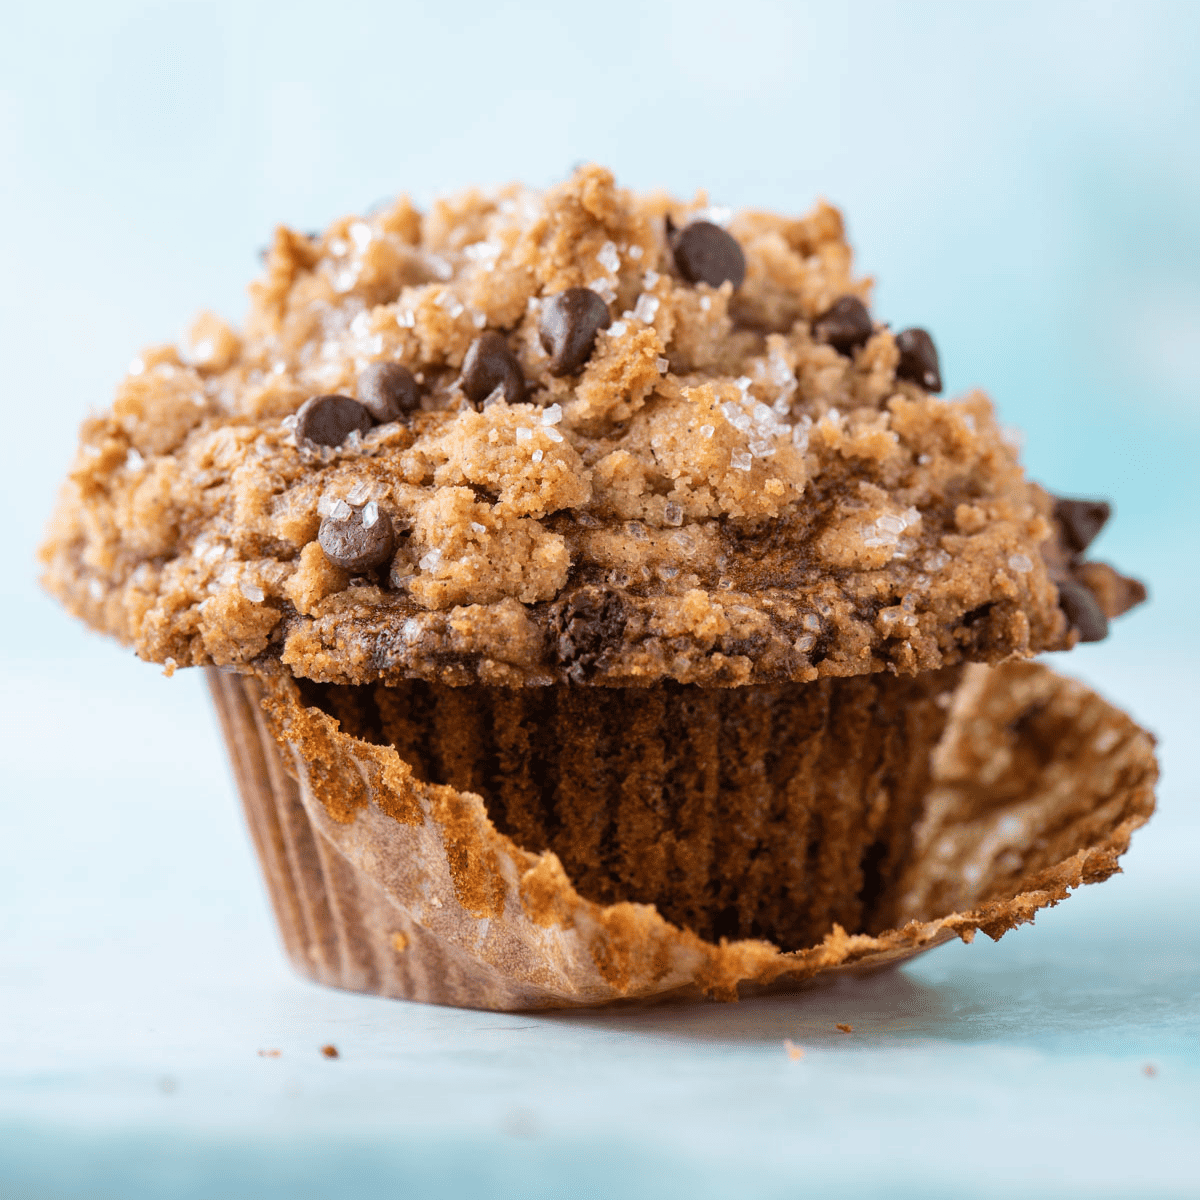 How To Make A Crumb Topping For Baking Amazing Desserts Every Time!